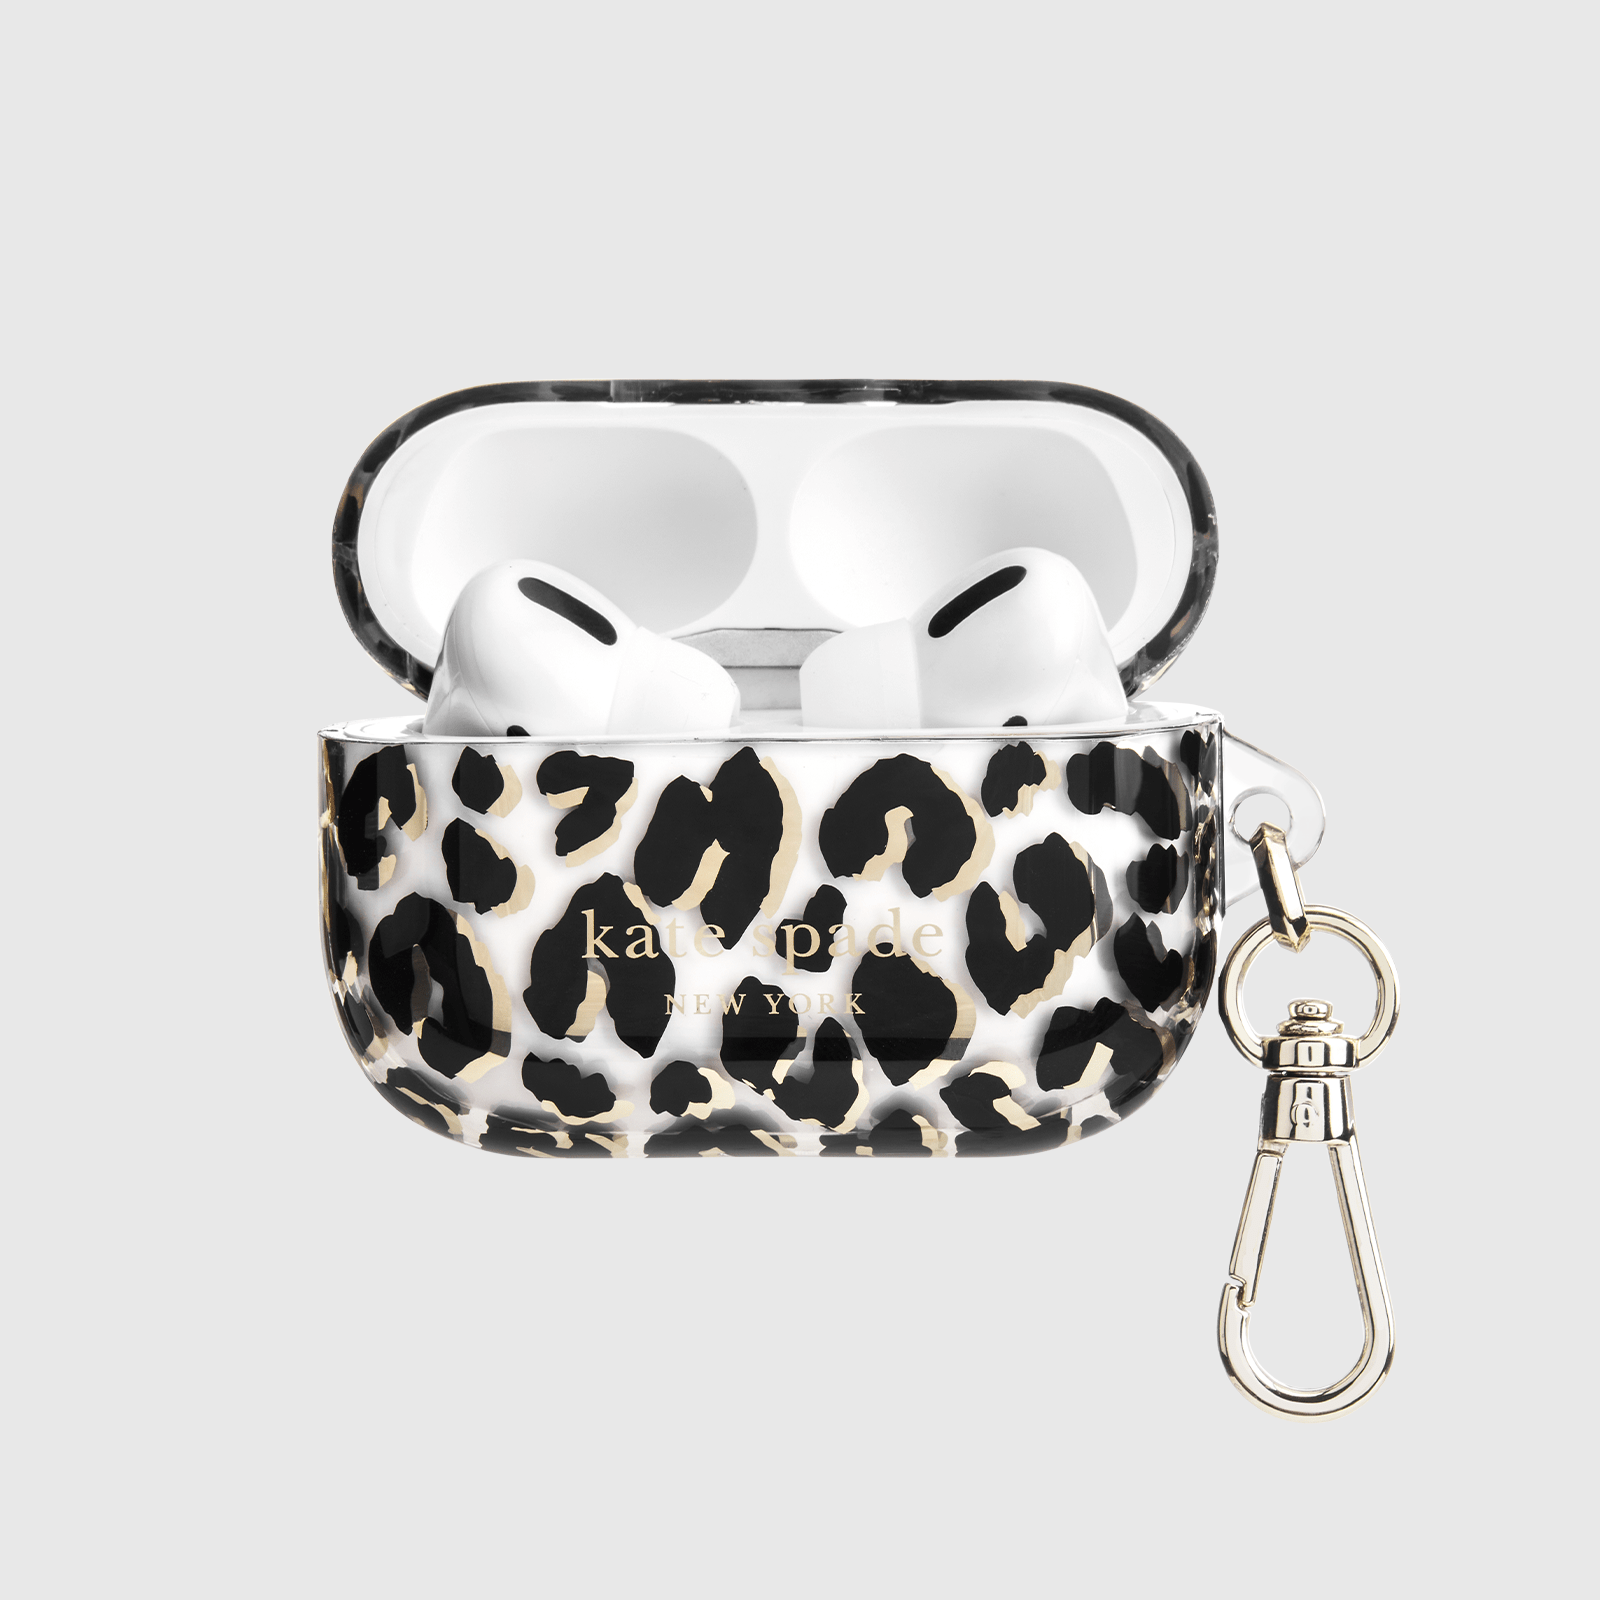 kate spade new york City Leopard - AirPods Pro 1 & 2